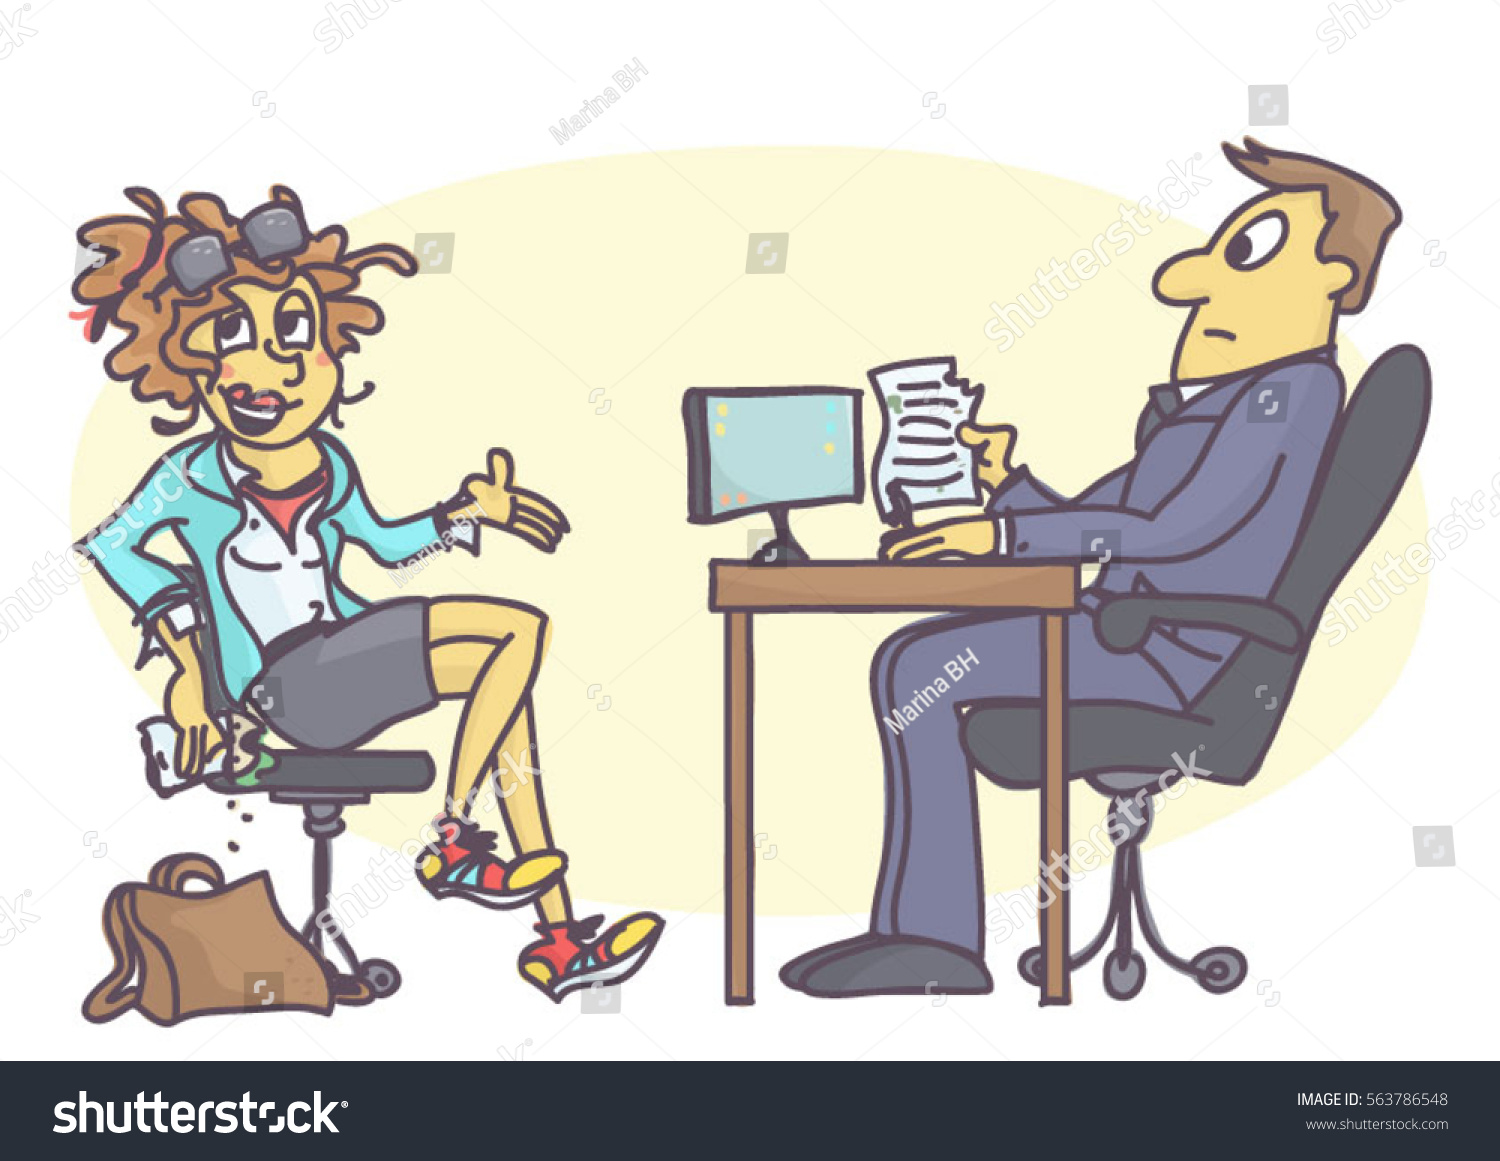 SVG of Cartoon illustration with sloppy and untidy woman on job interview svg